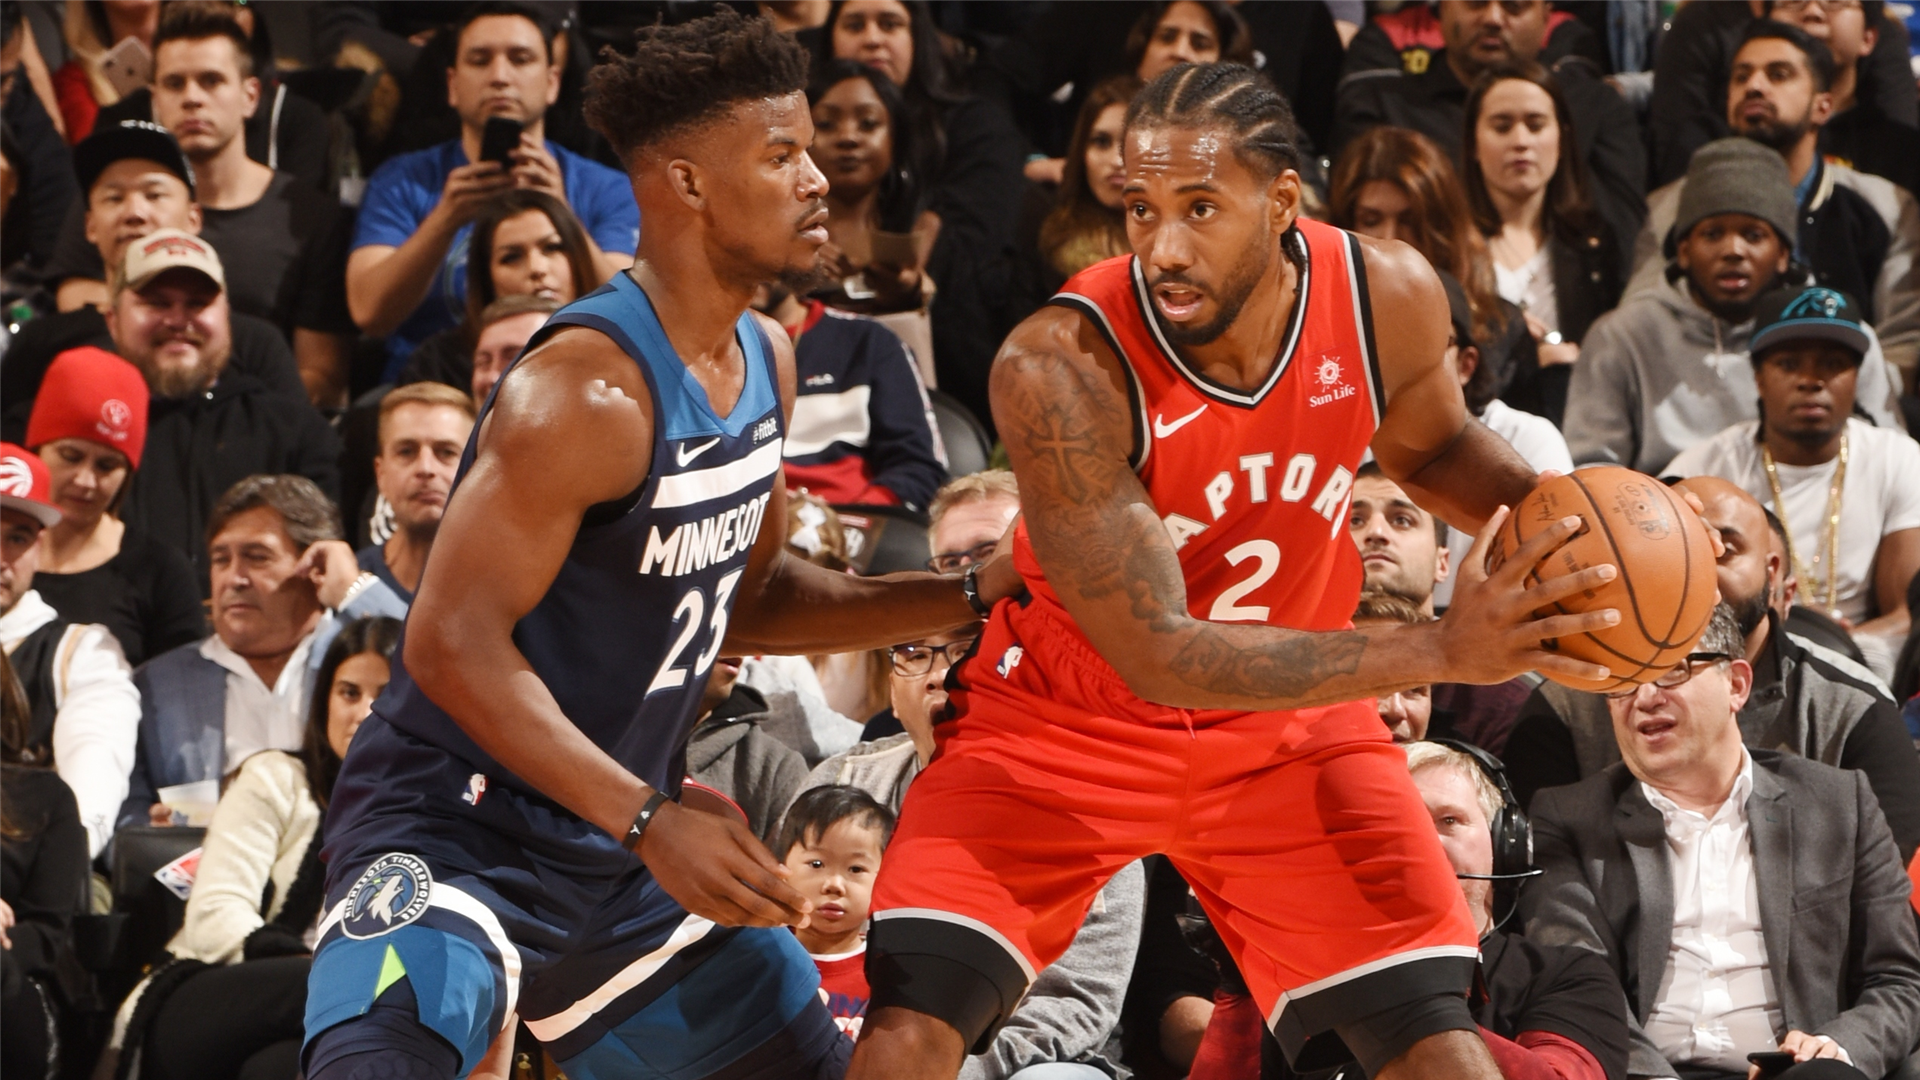 Four takeaways from the Toronto Raptors 112-105 win over the Minnesota Timberwolves ...